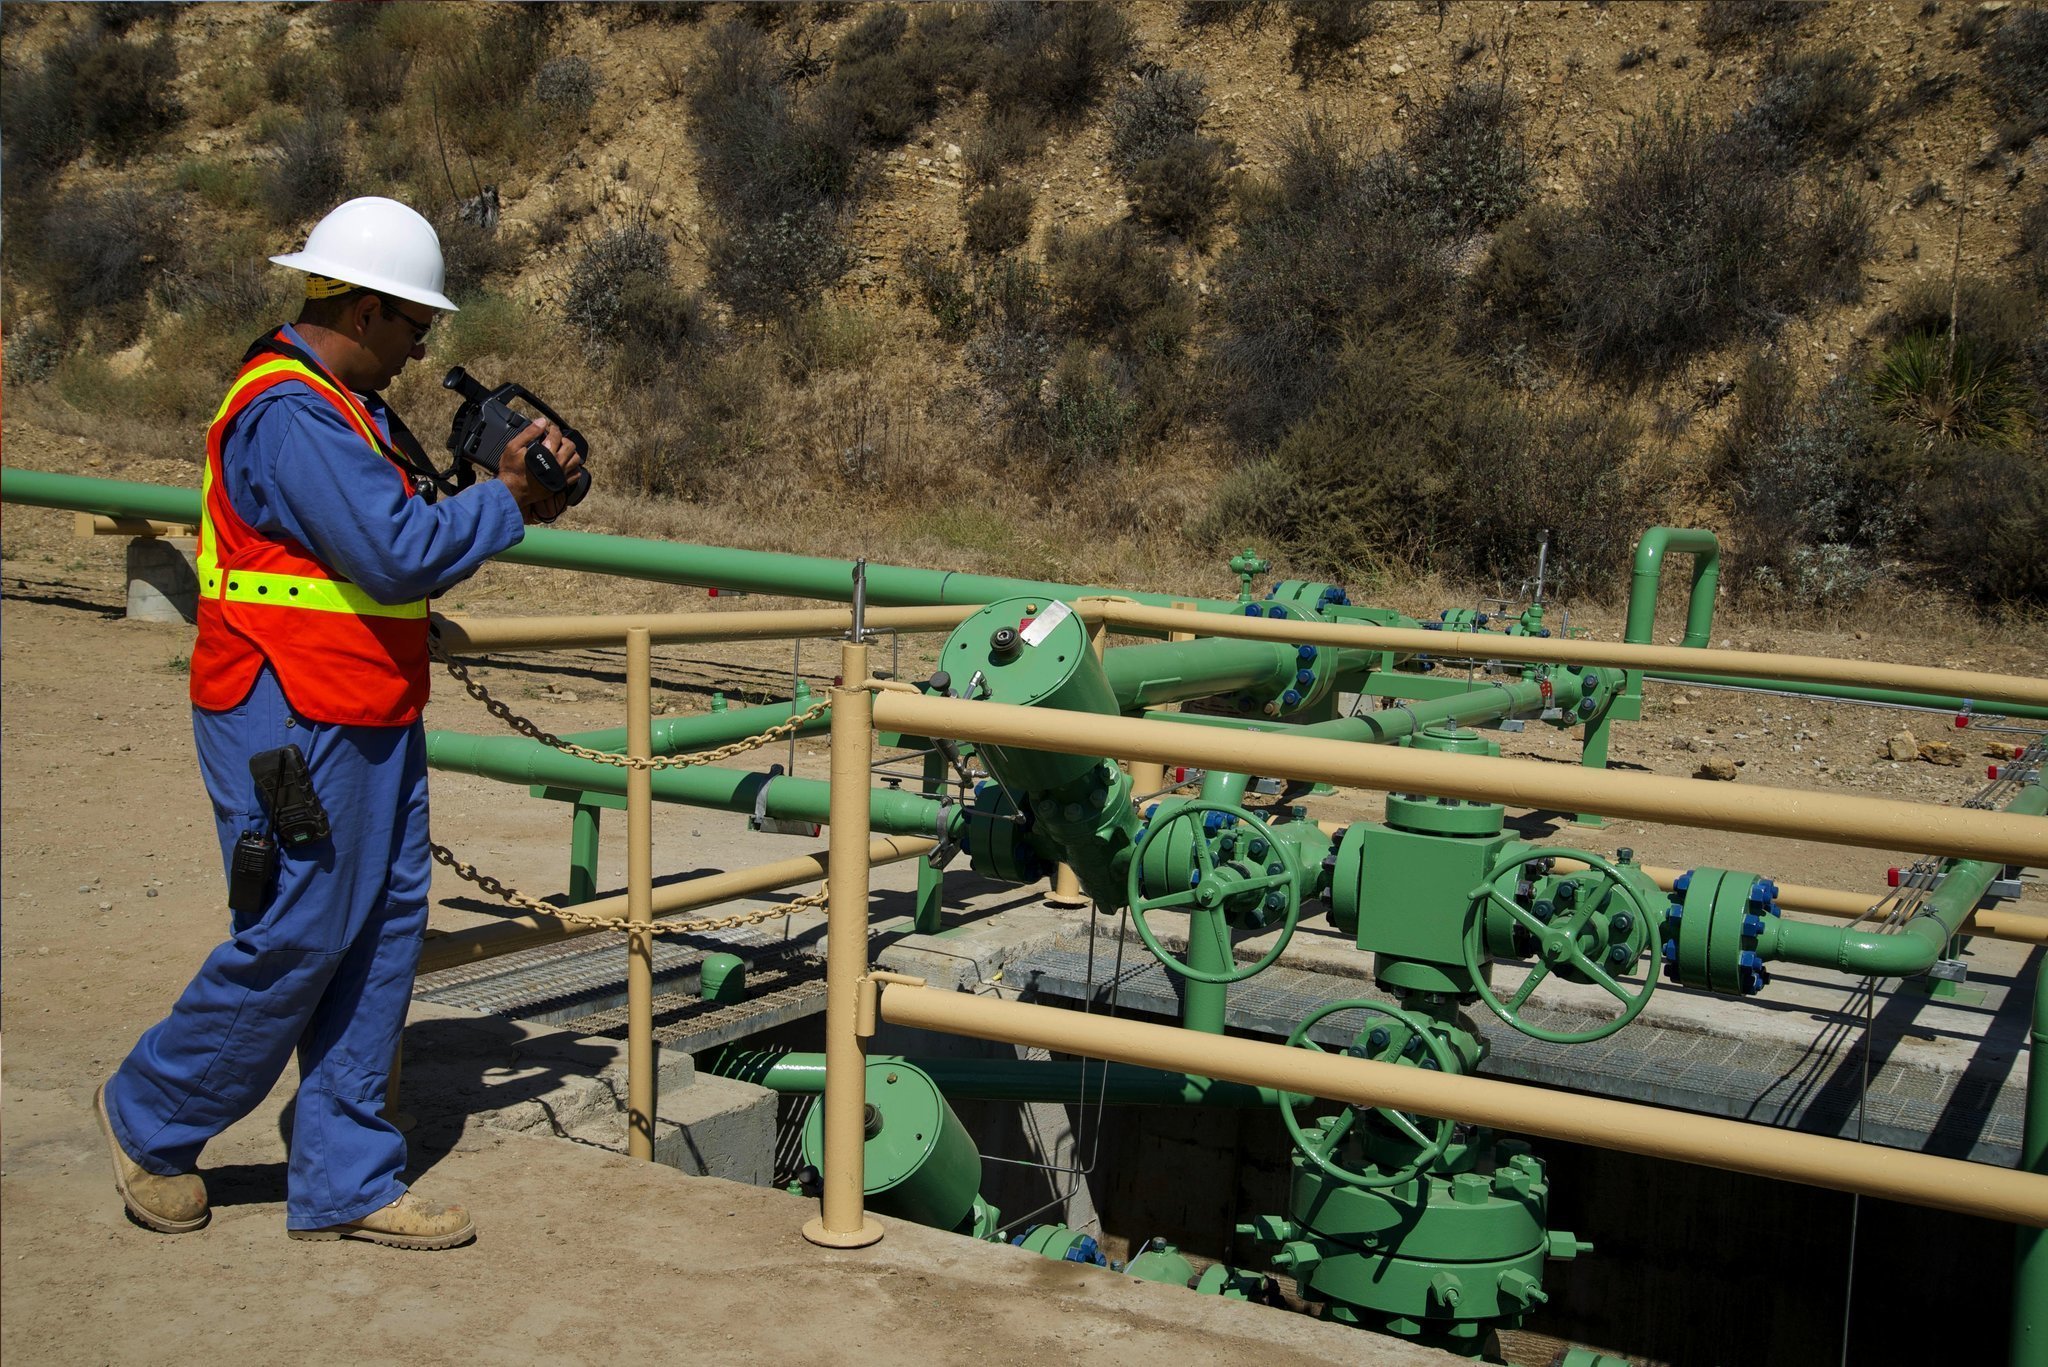 California adopts strictest methane rule in the nation